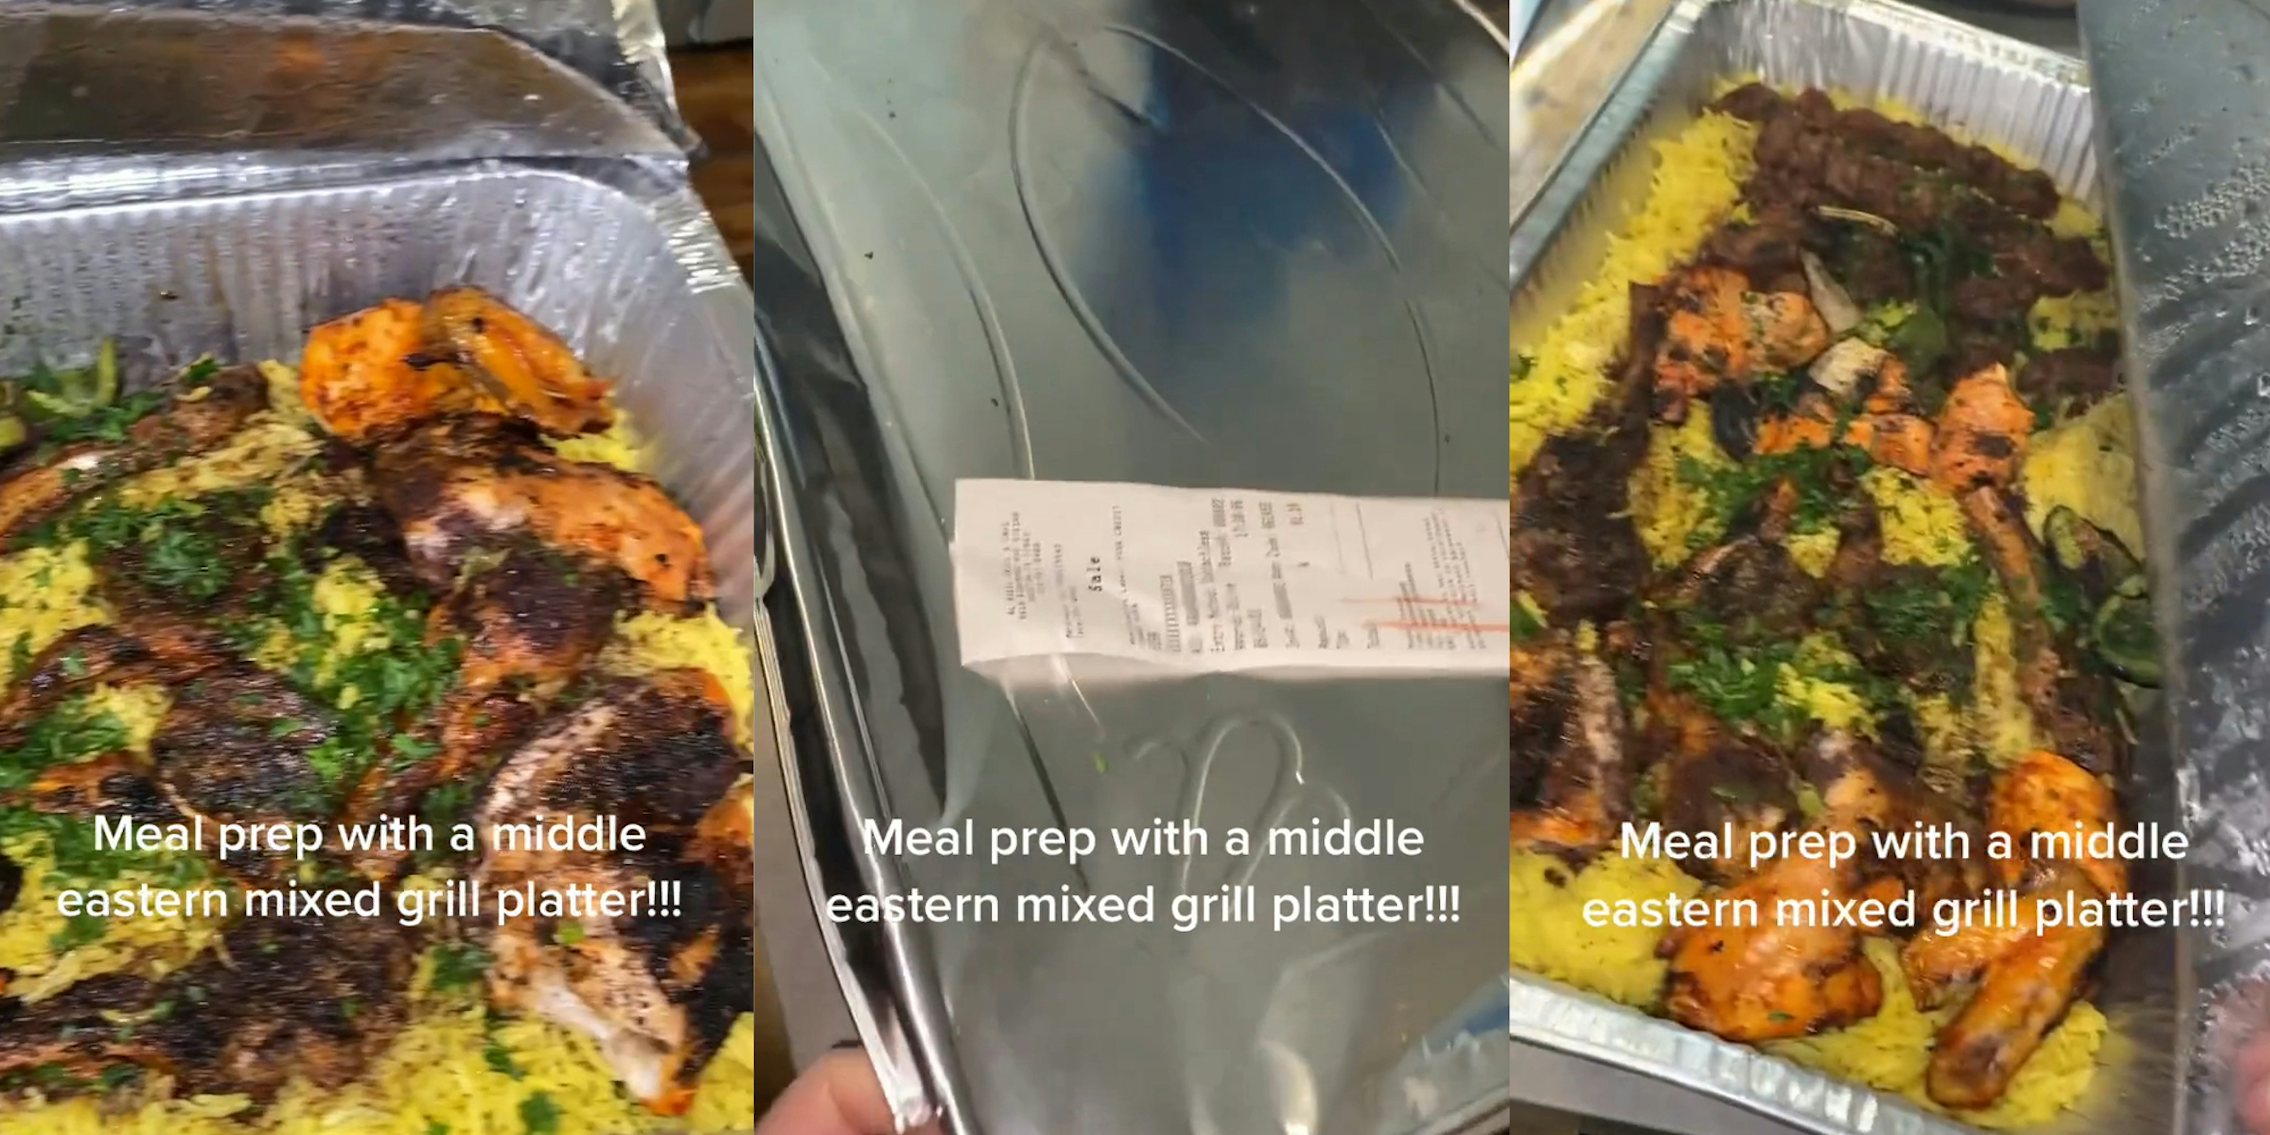 Customer shares 'meal prep' hack with Middle Eastern platter for $80